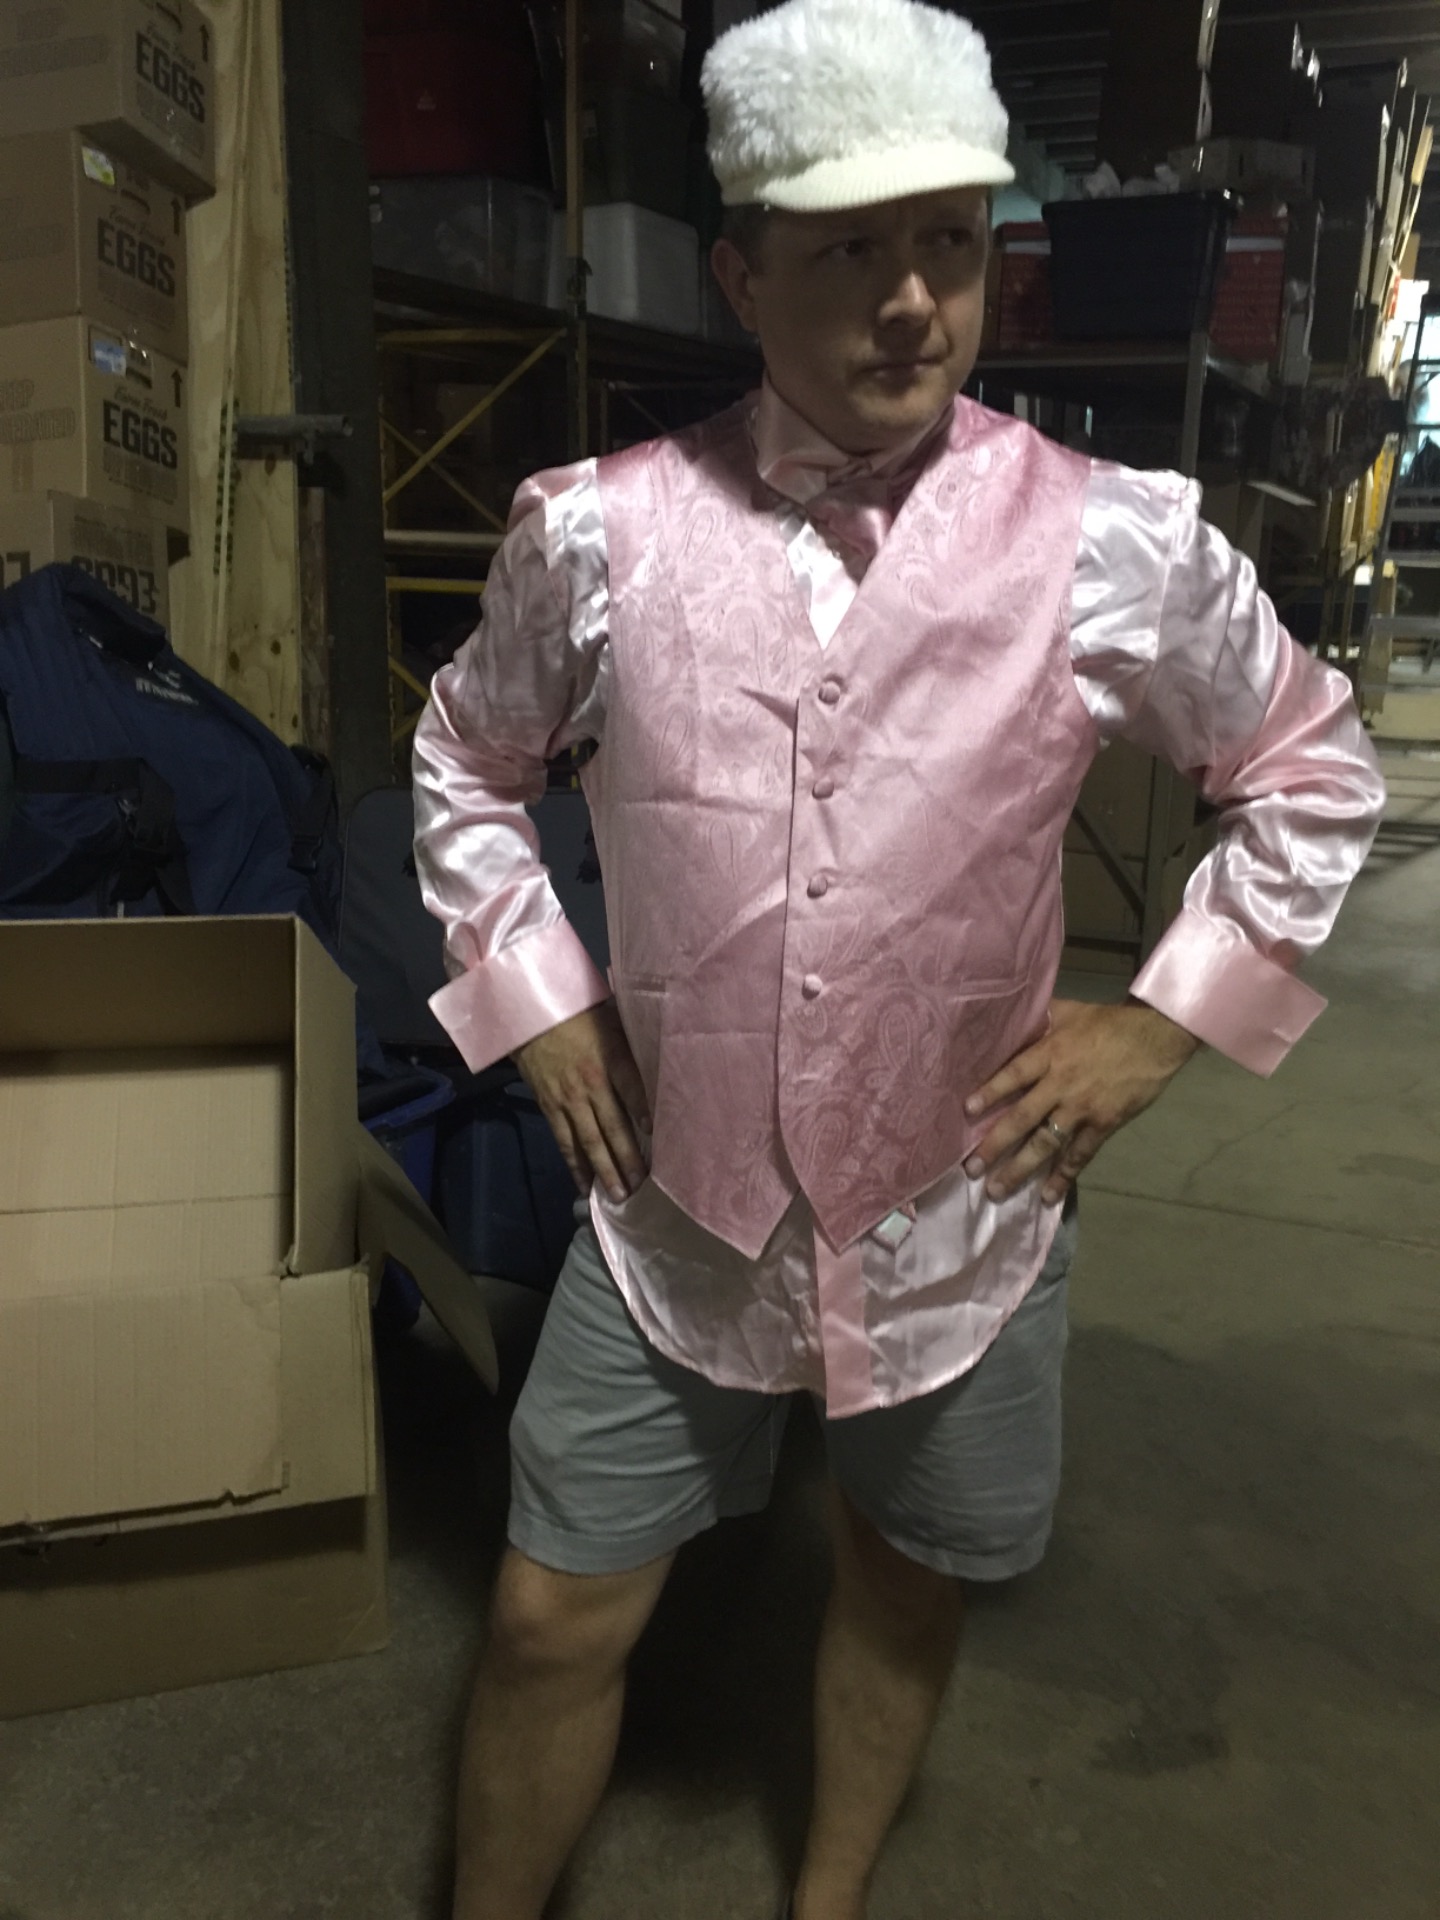 The Pink Prince of the Thrift